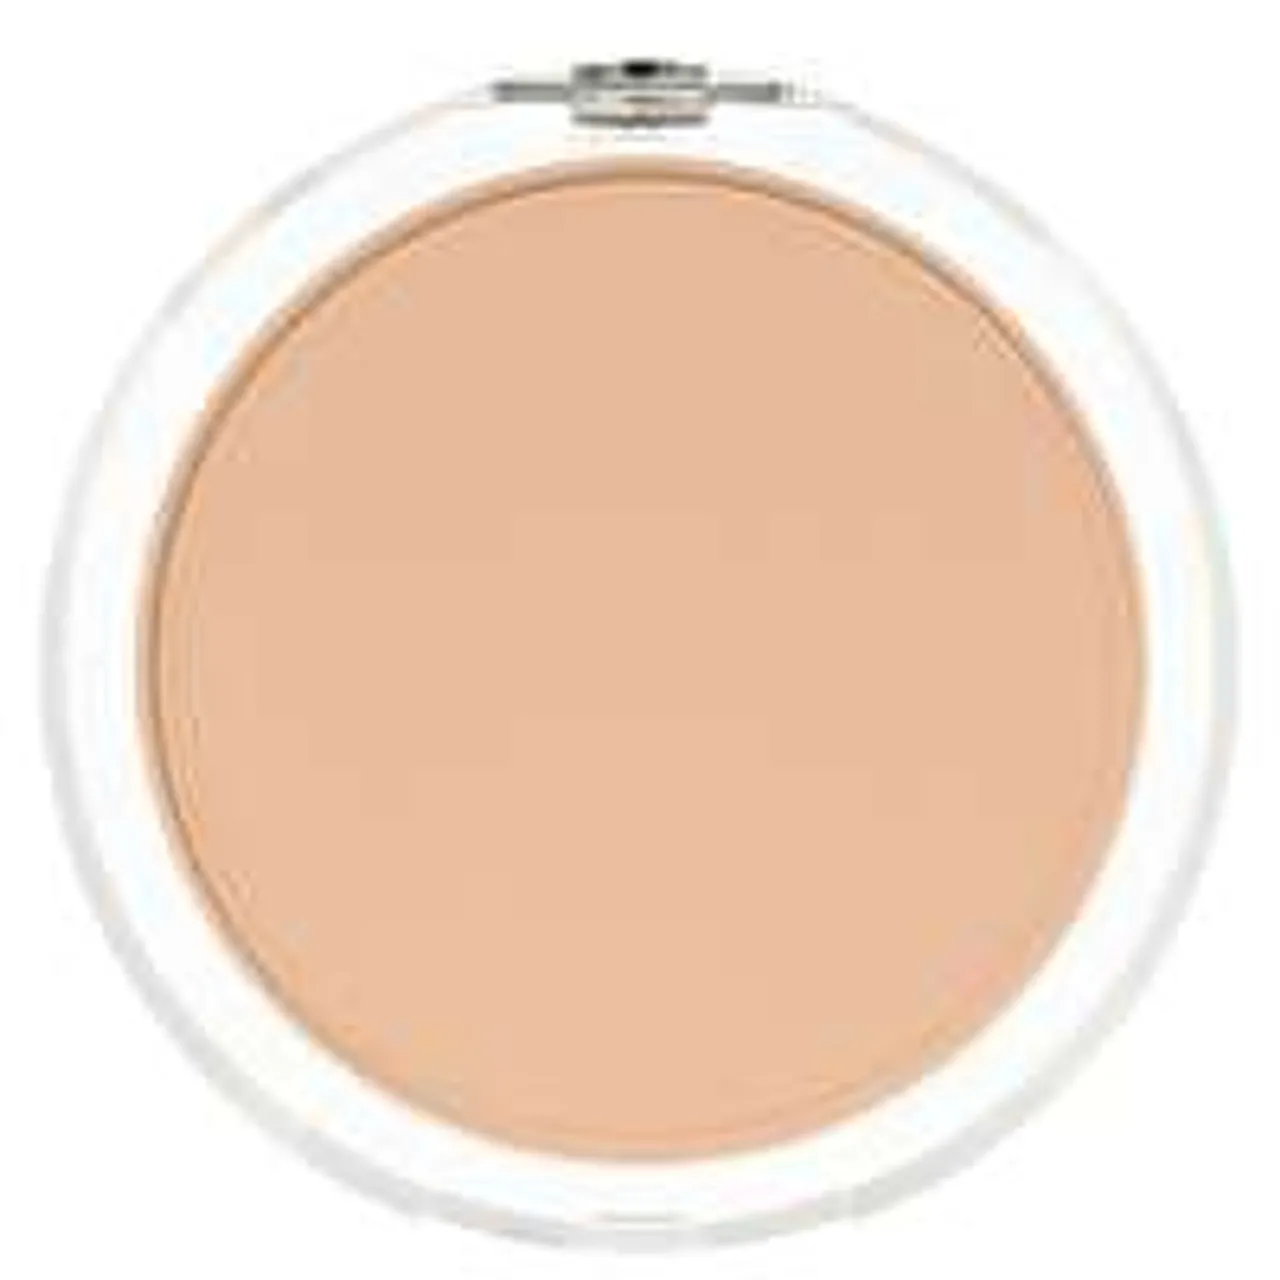 Clinique Almost Powder Makeup SPF15 New Packaging 04 Neutral 10g / 0.35 oz.